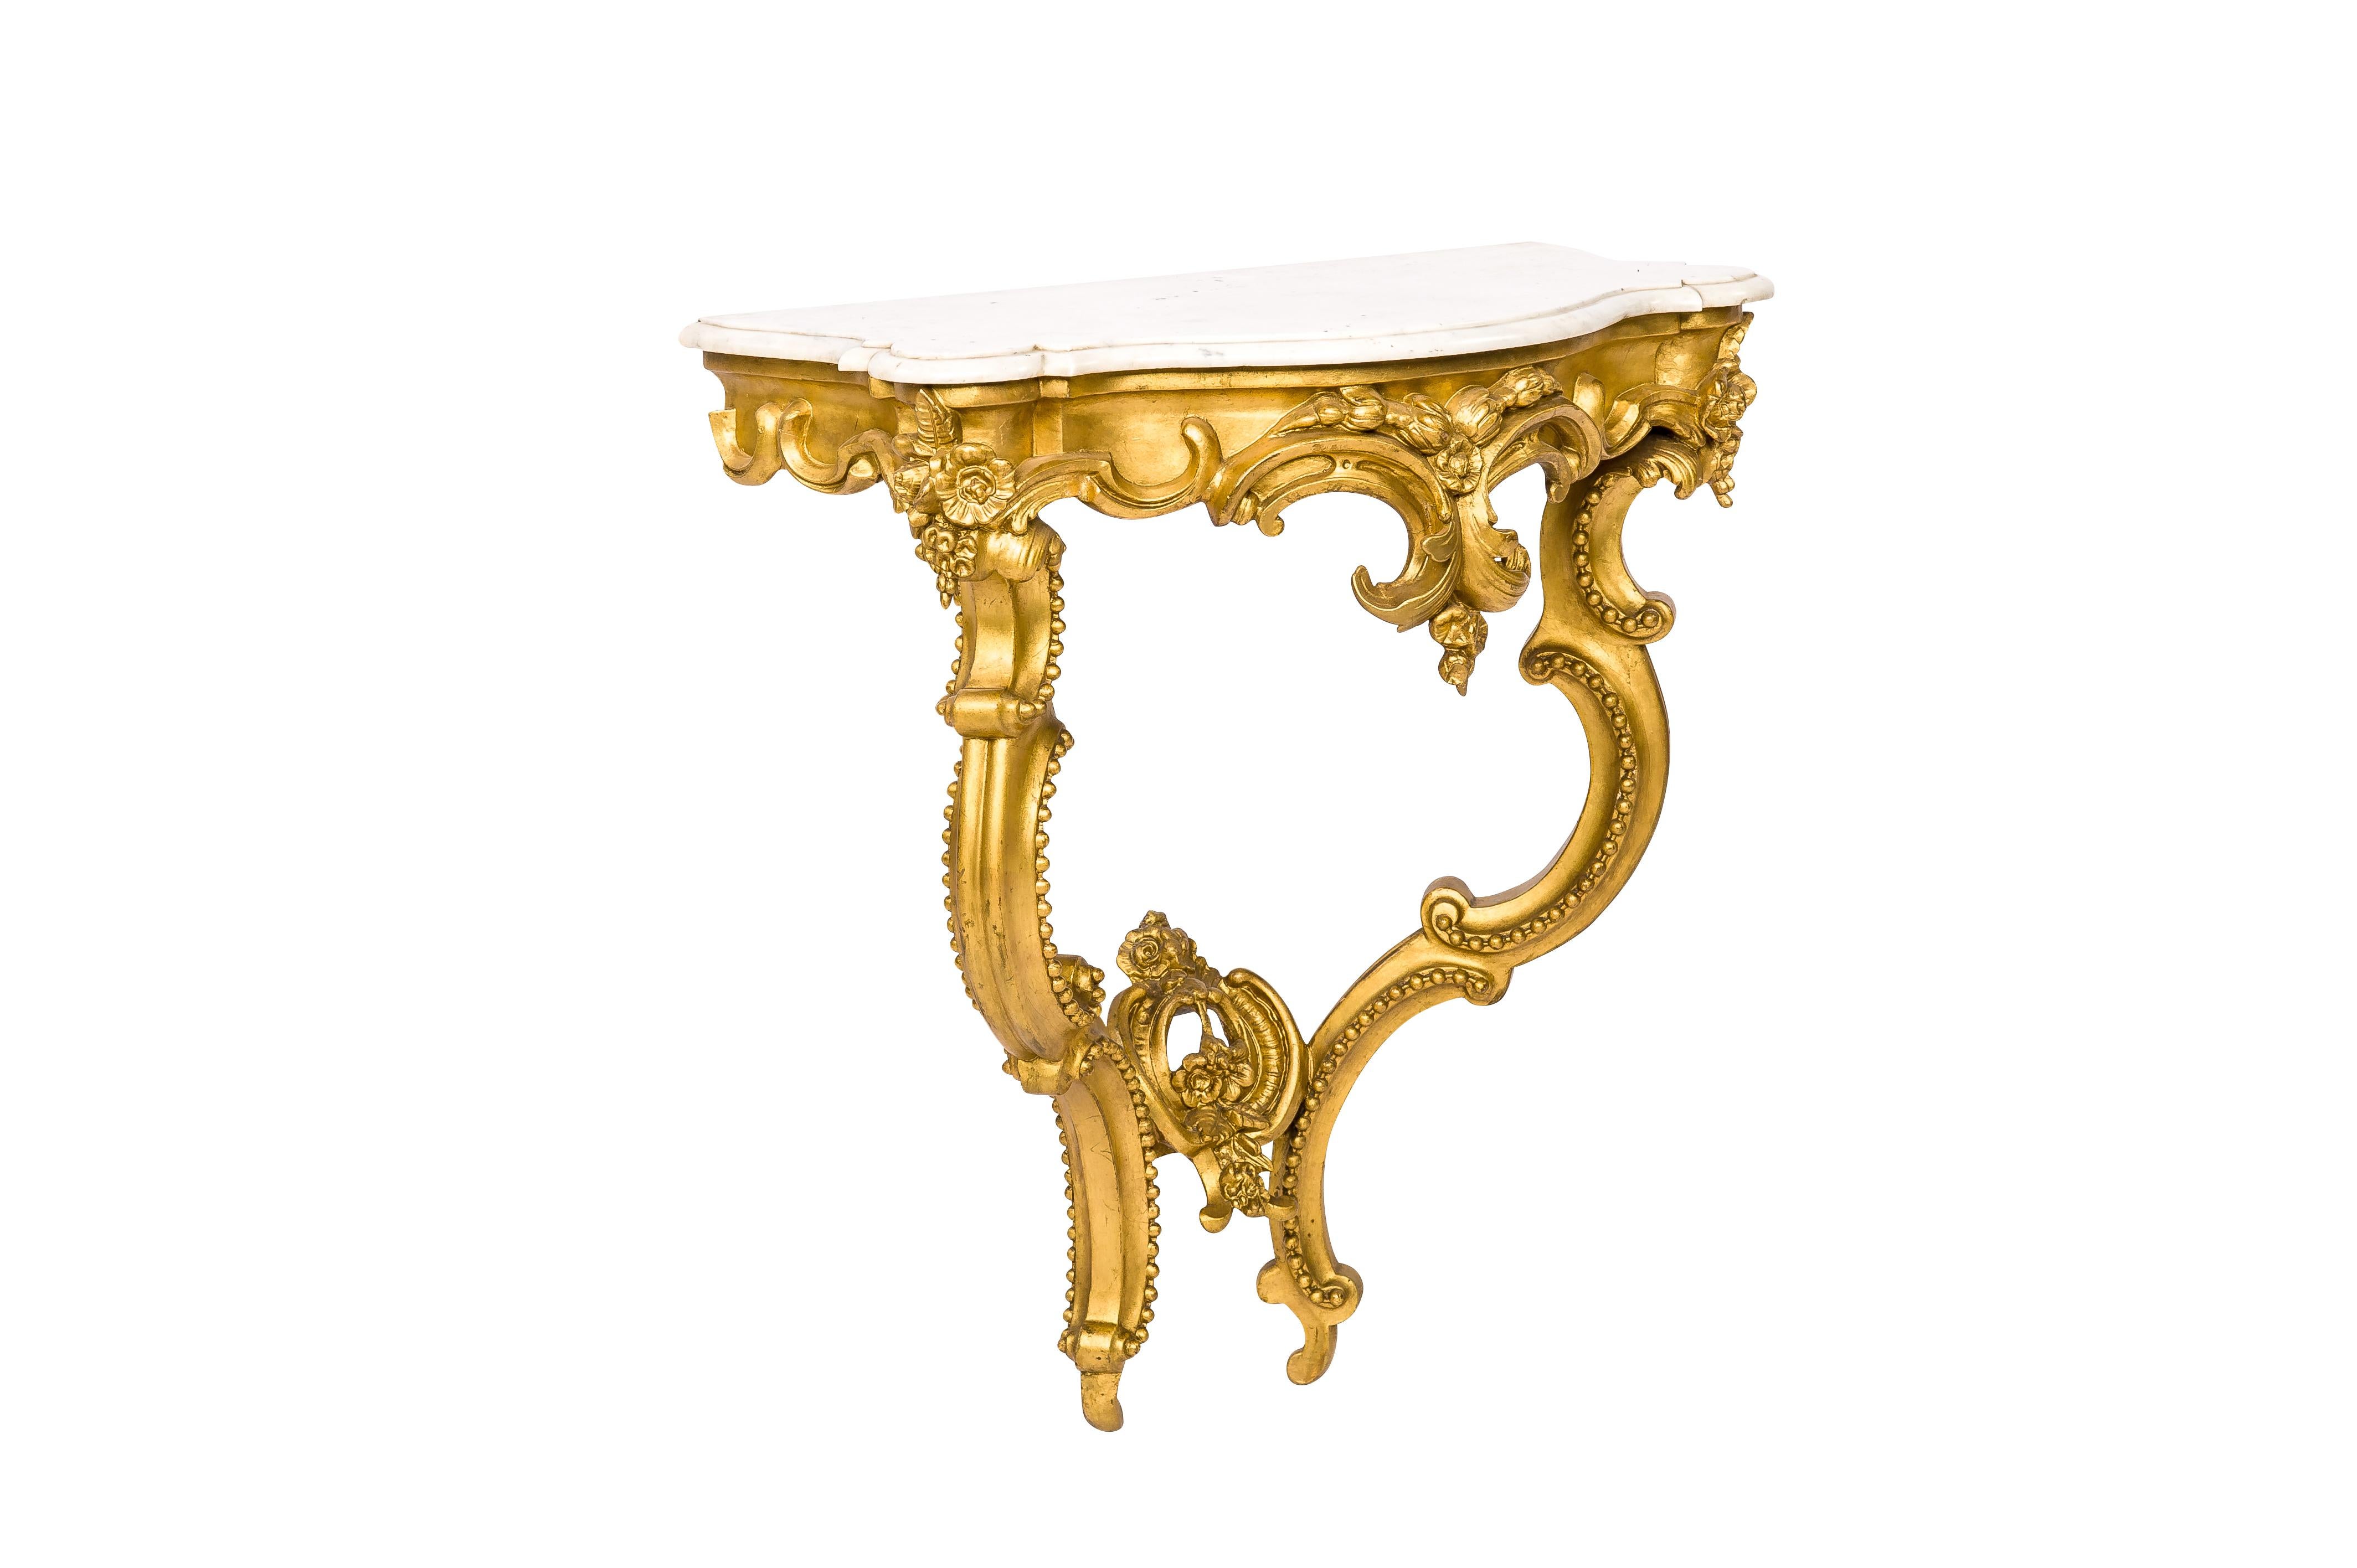 This elegant Baroque console table or hall table was made in Southern France, around 1870. The table has a solid pine base smoothened with gesso. The table has two legs built up from C scrolls and it is decorated with classic pearl beading following